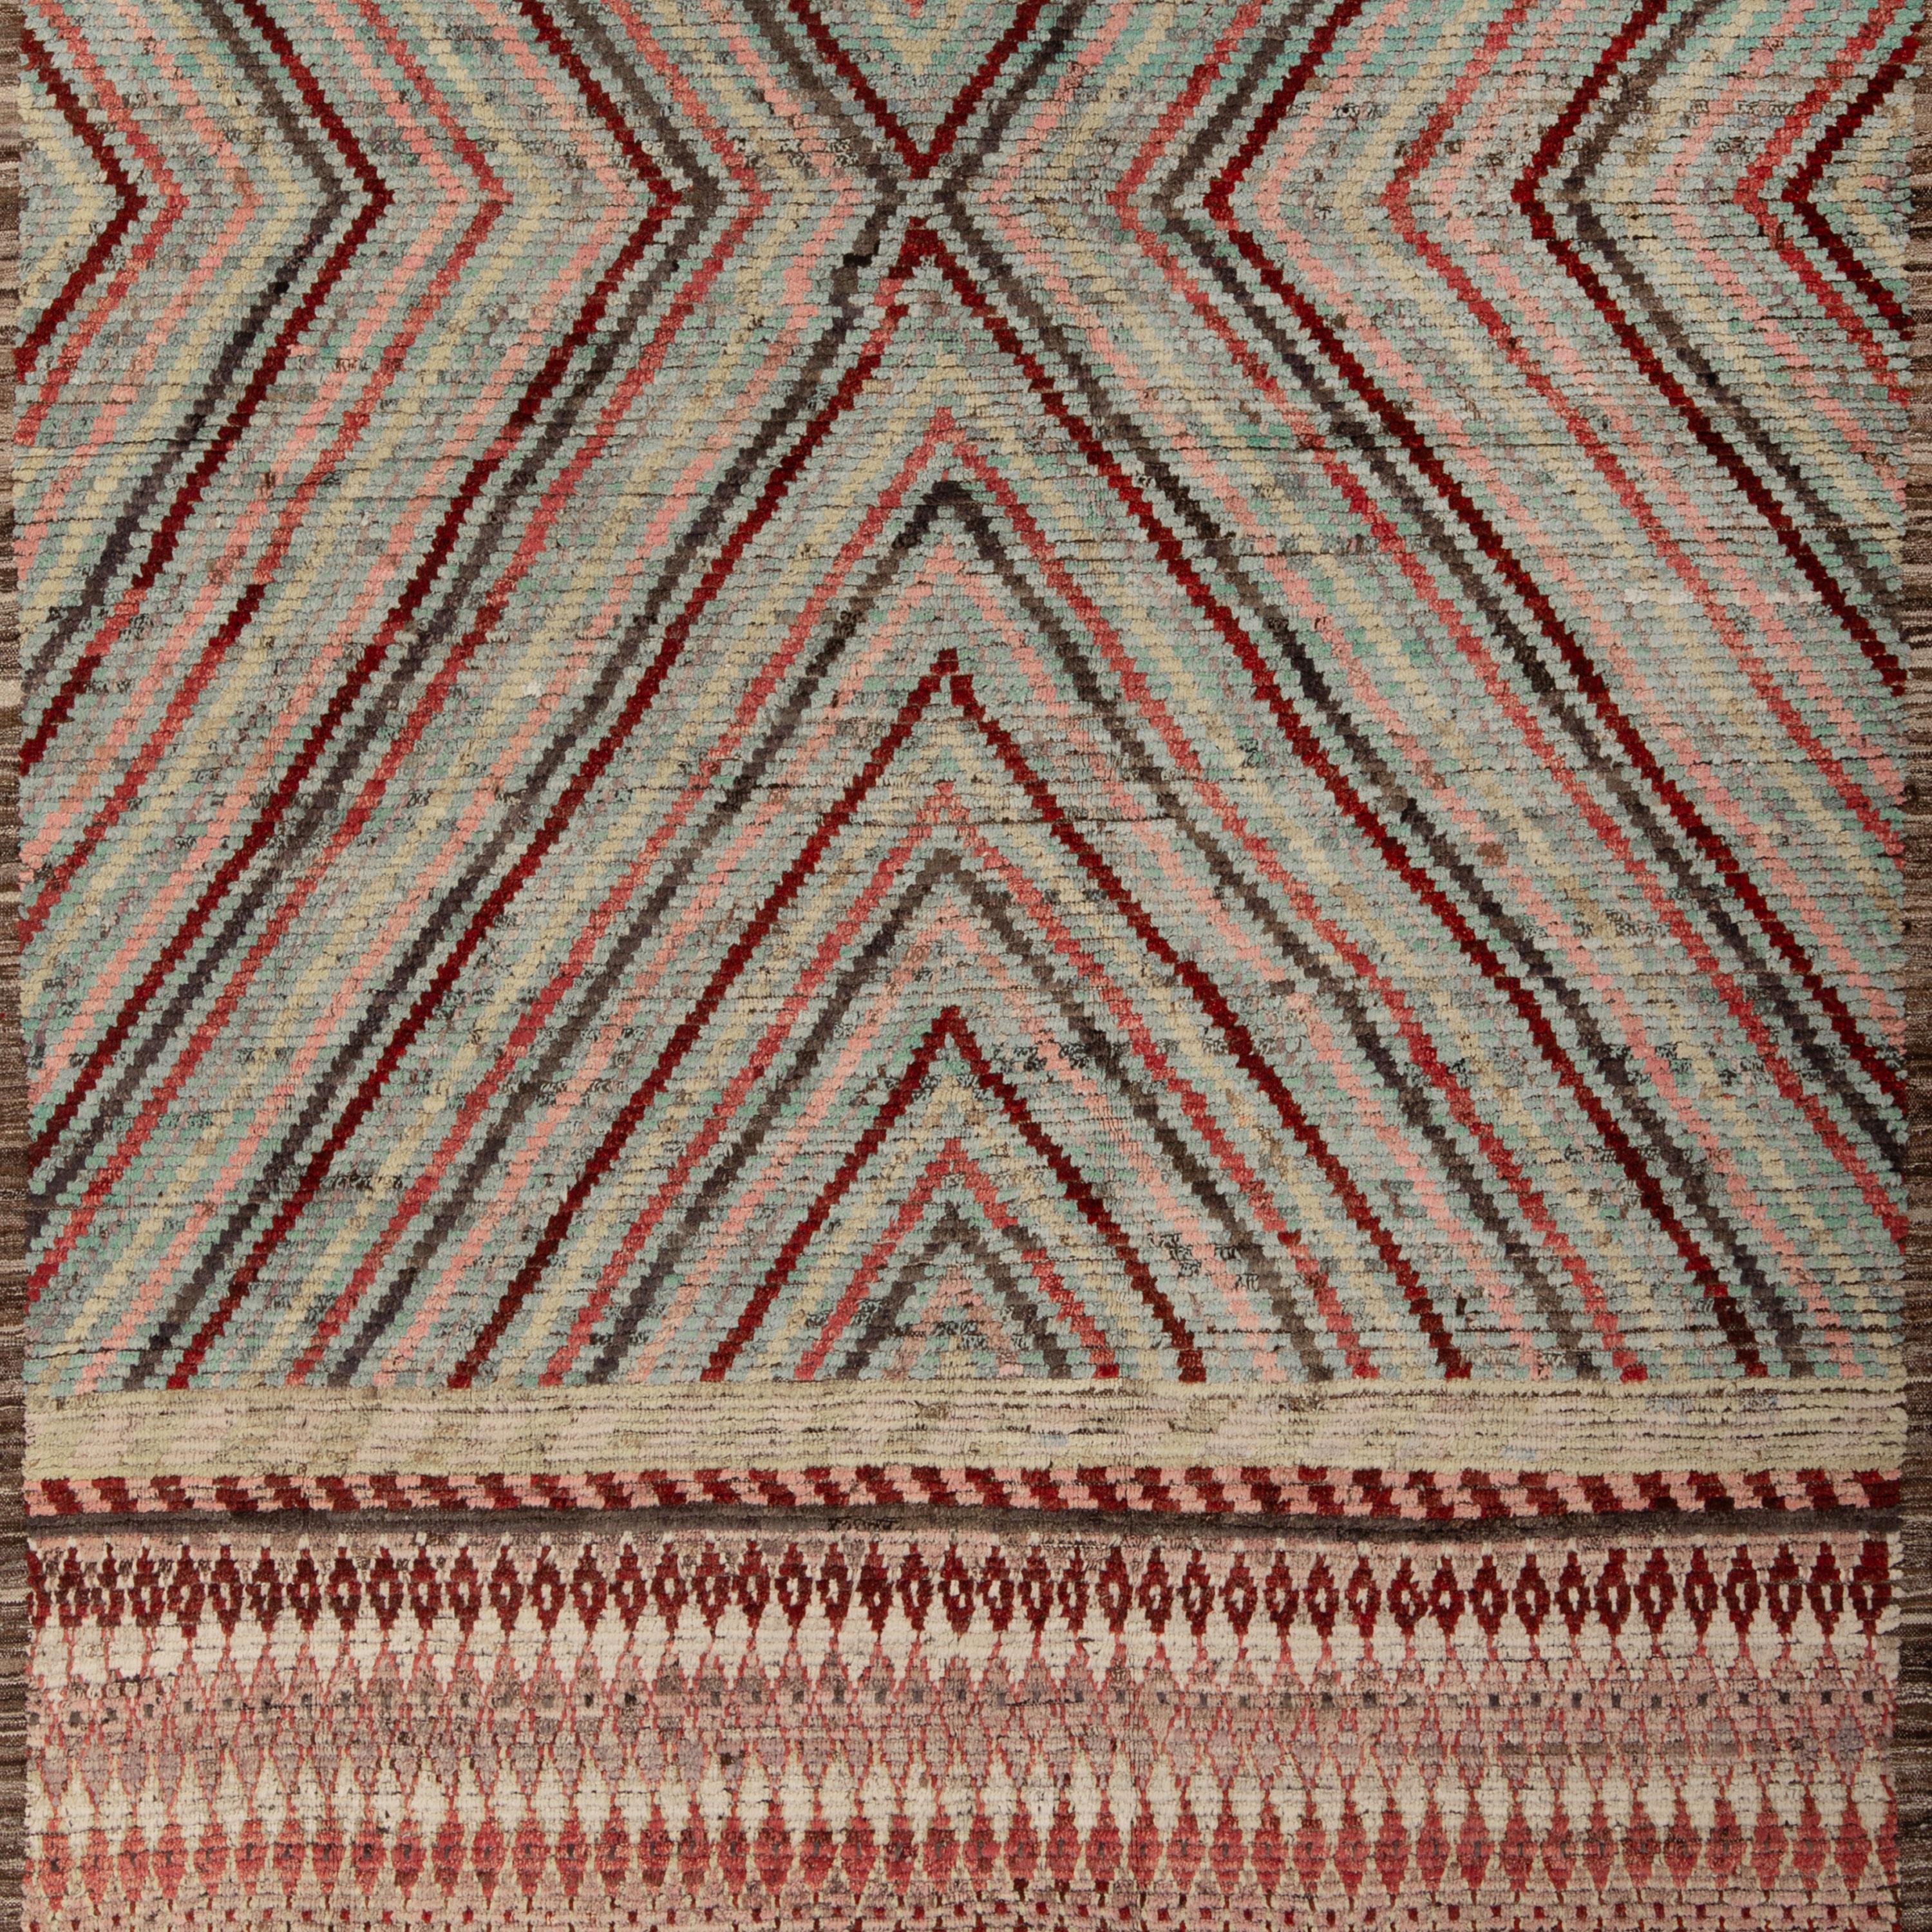 Inspired by the grounding foundations of Earth's natural colors and pure materials, this Zameen Multicolored Geometric Transitional Wool Rug - 7'2